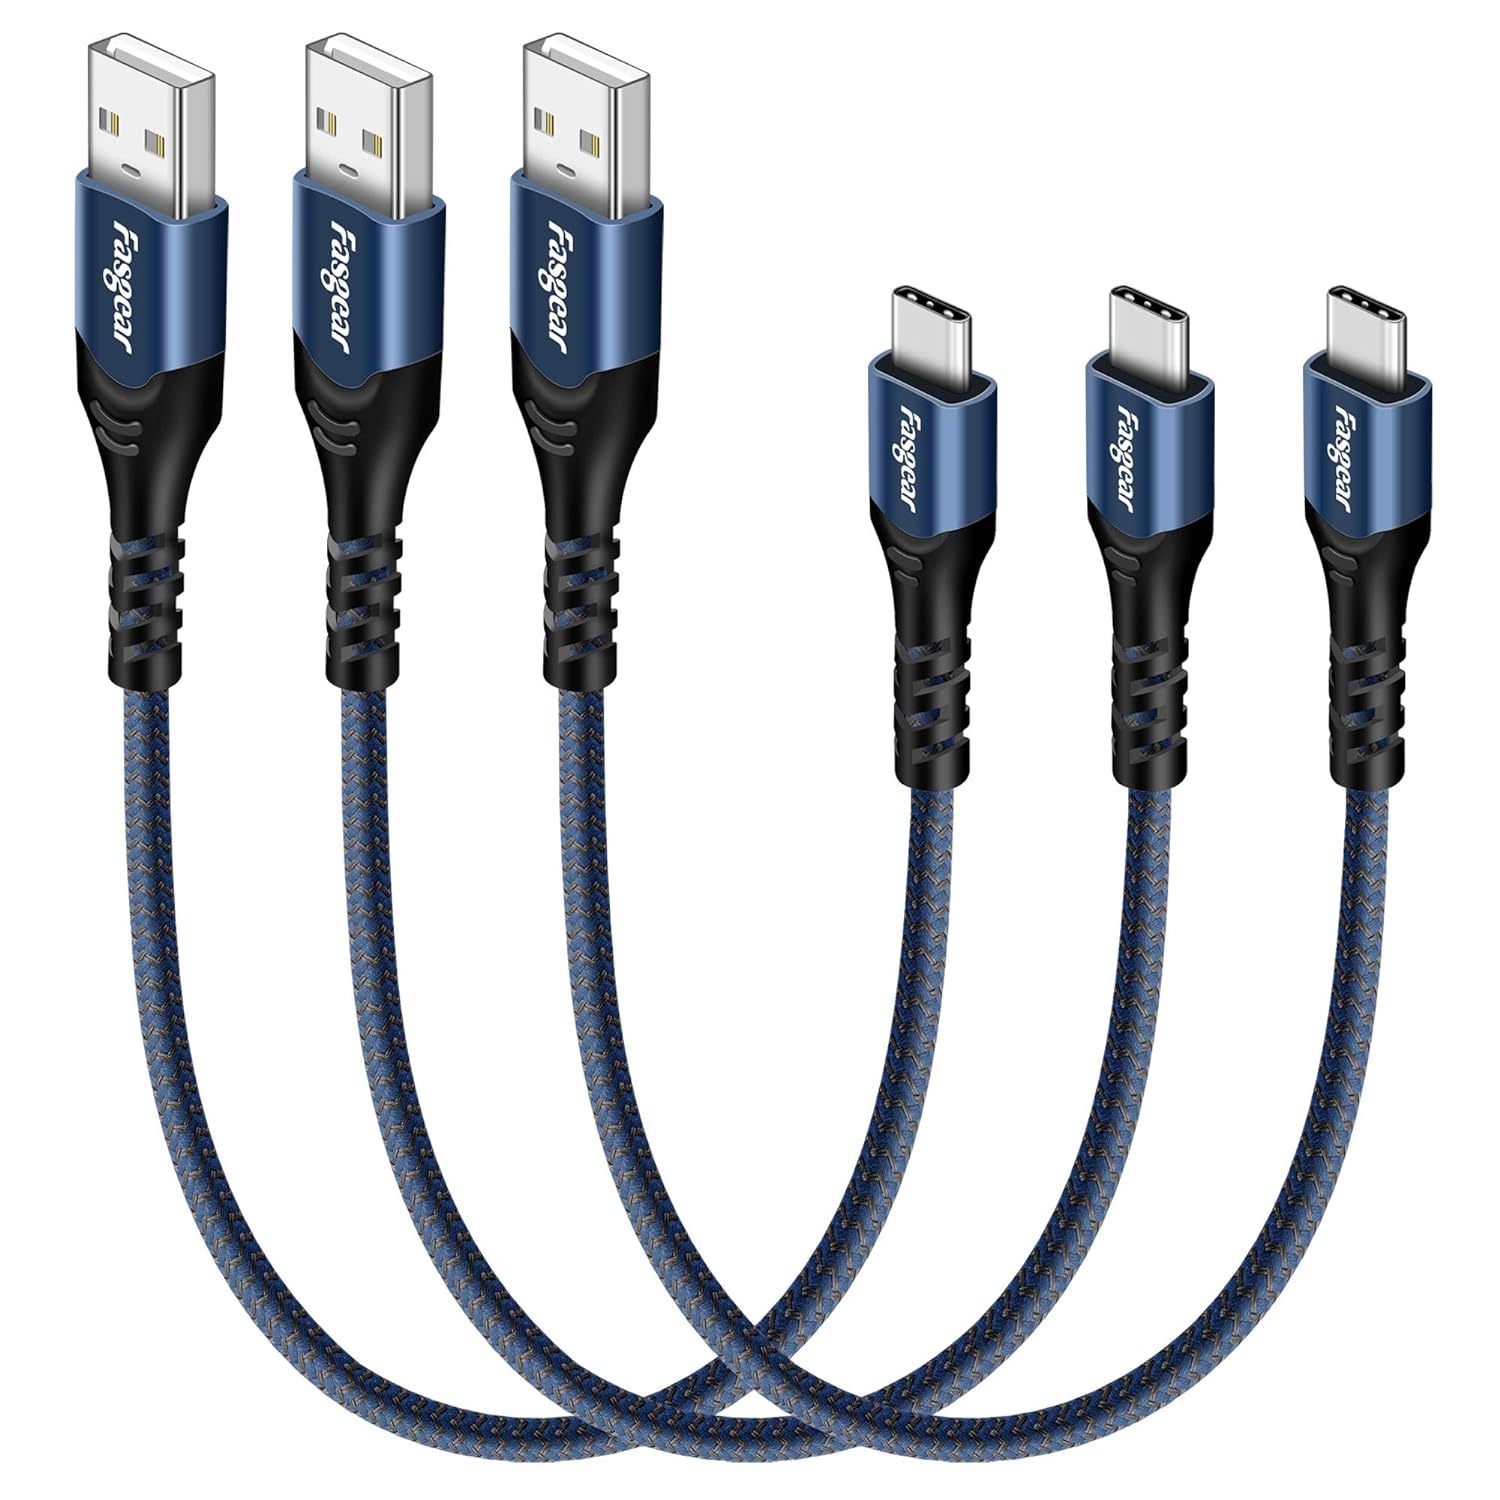 Primary image for Usb C Short Cable - 3 Pack 1Ft Fast Charging Braided Type C To Usb A Cord Compat